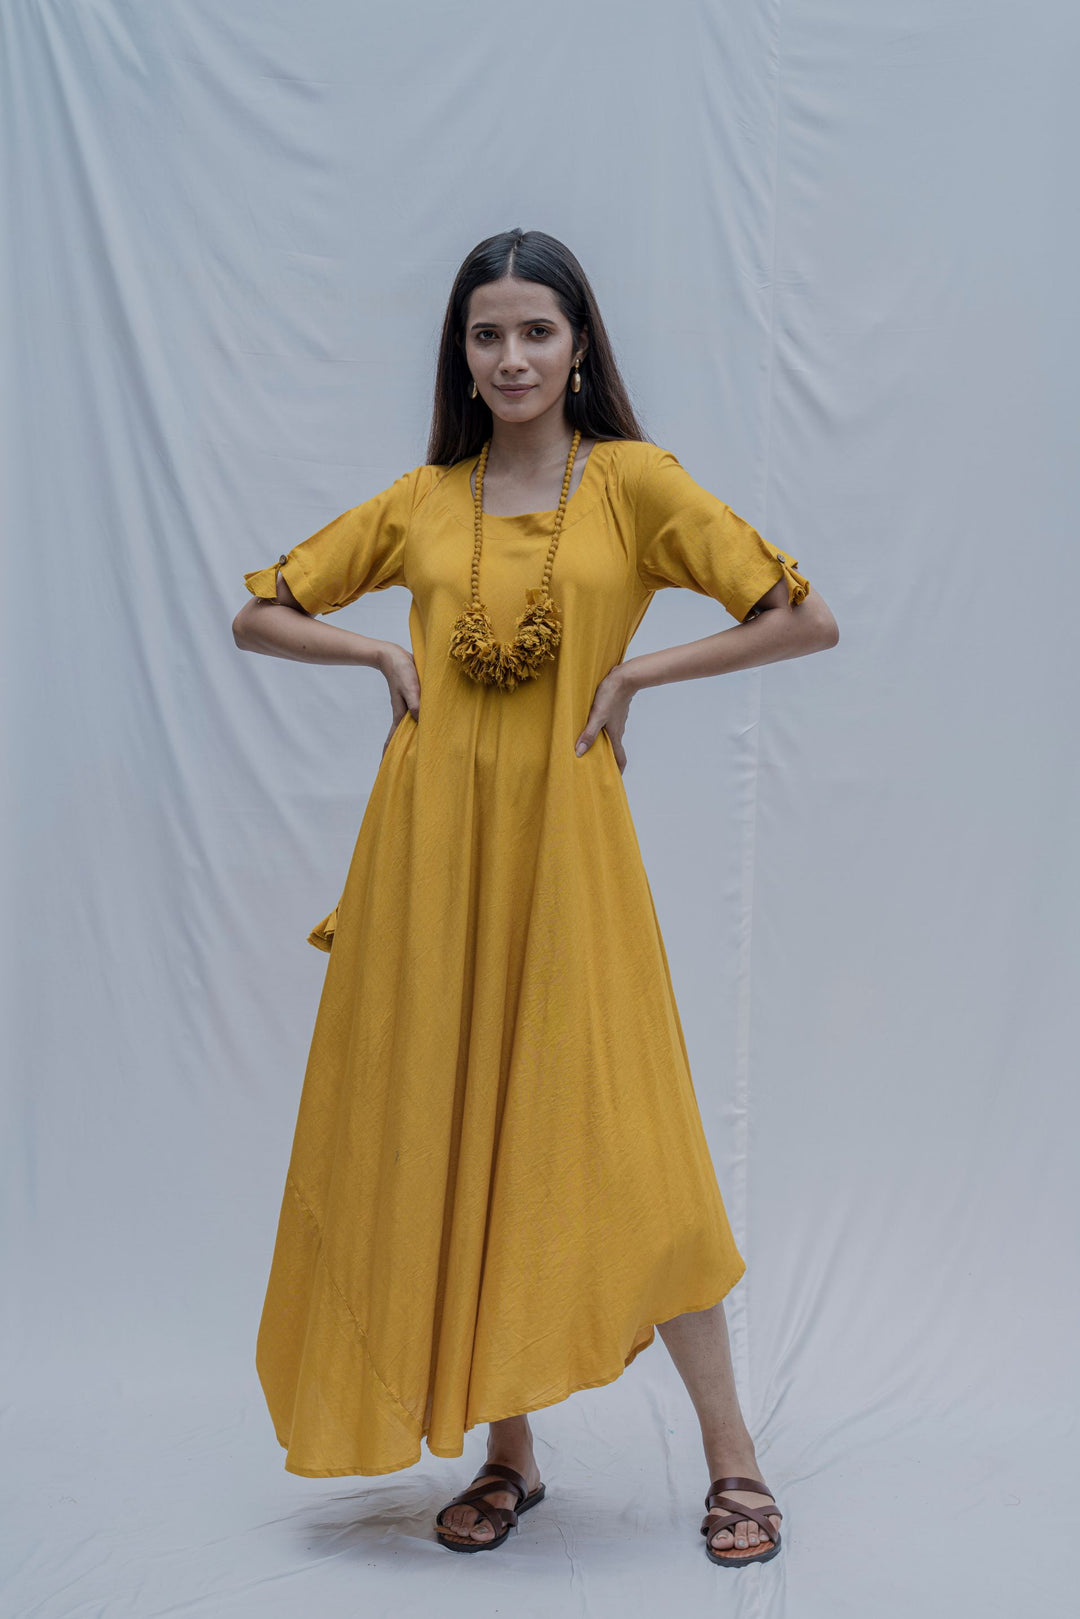 Mustard Bias Dress with Necklace